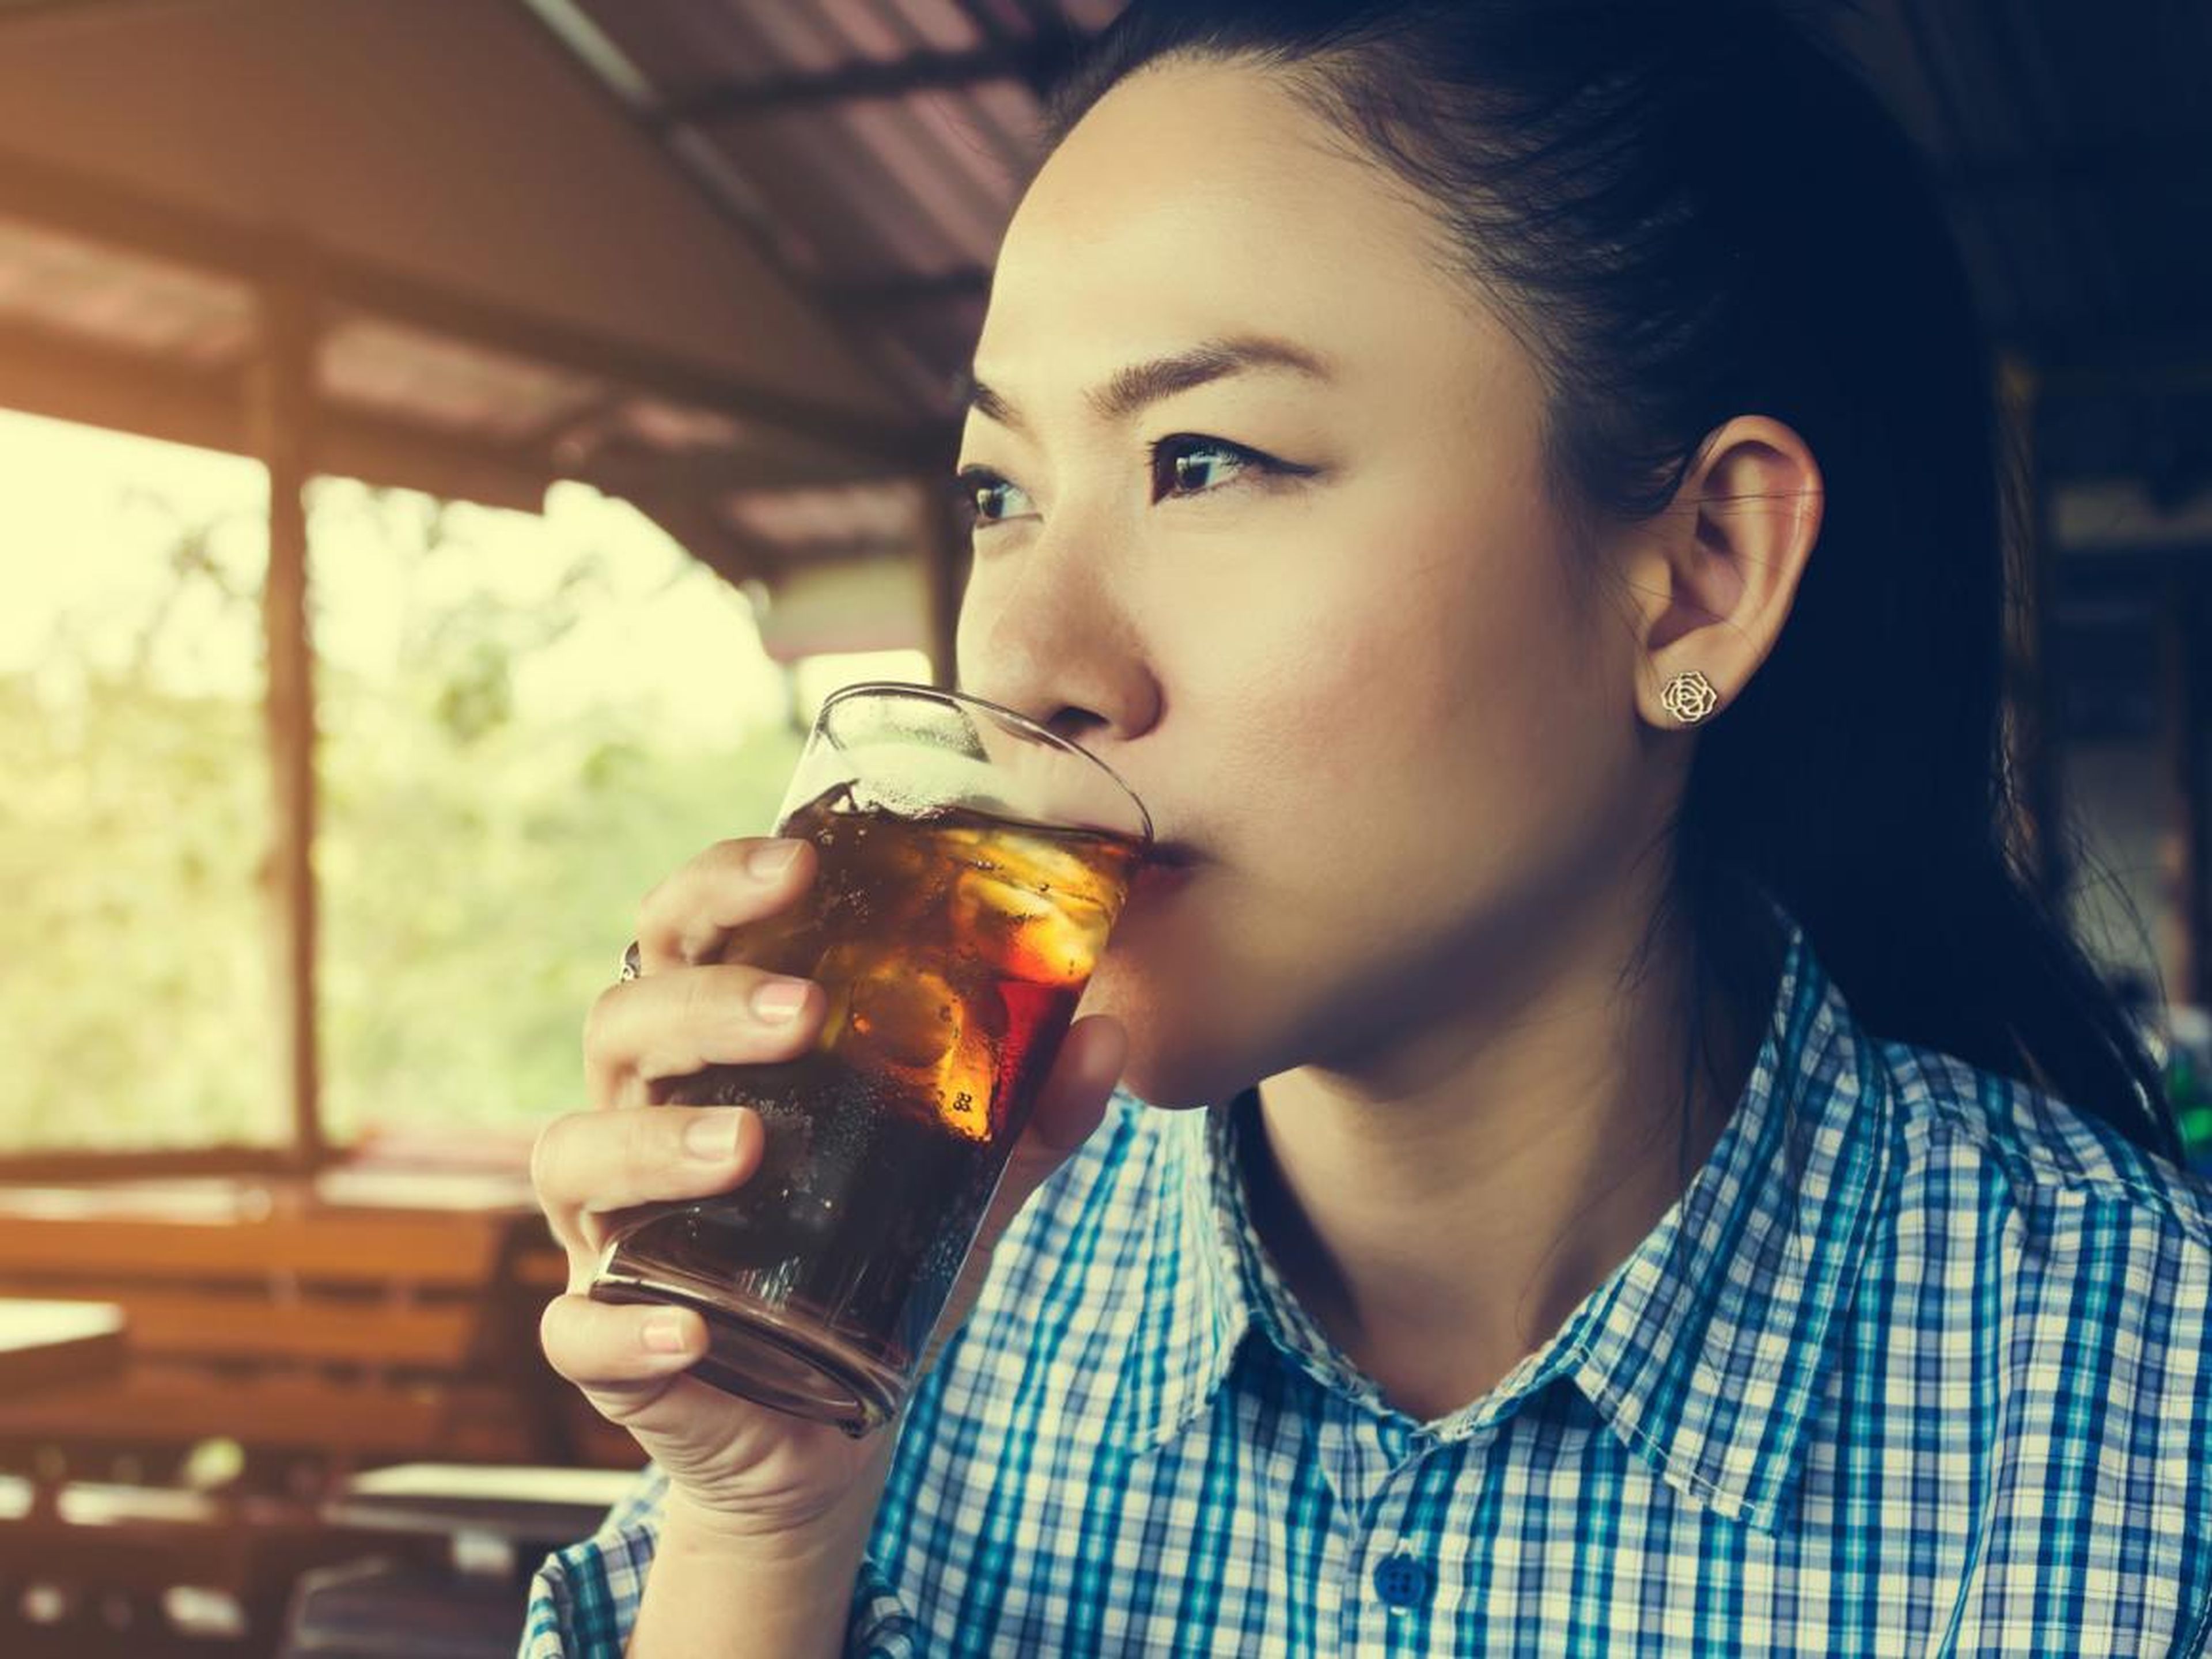 Replace soda or sweet tea with water, unsweetened tea, or other sugar-free drinks.